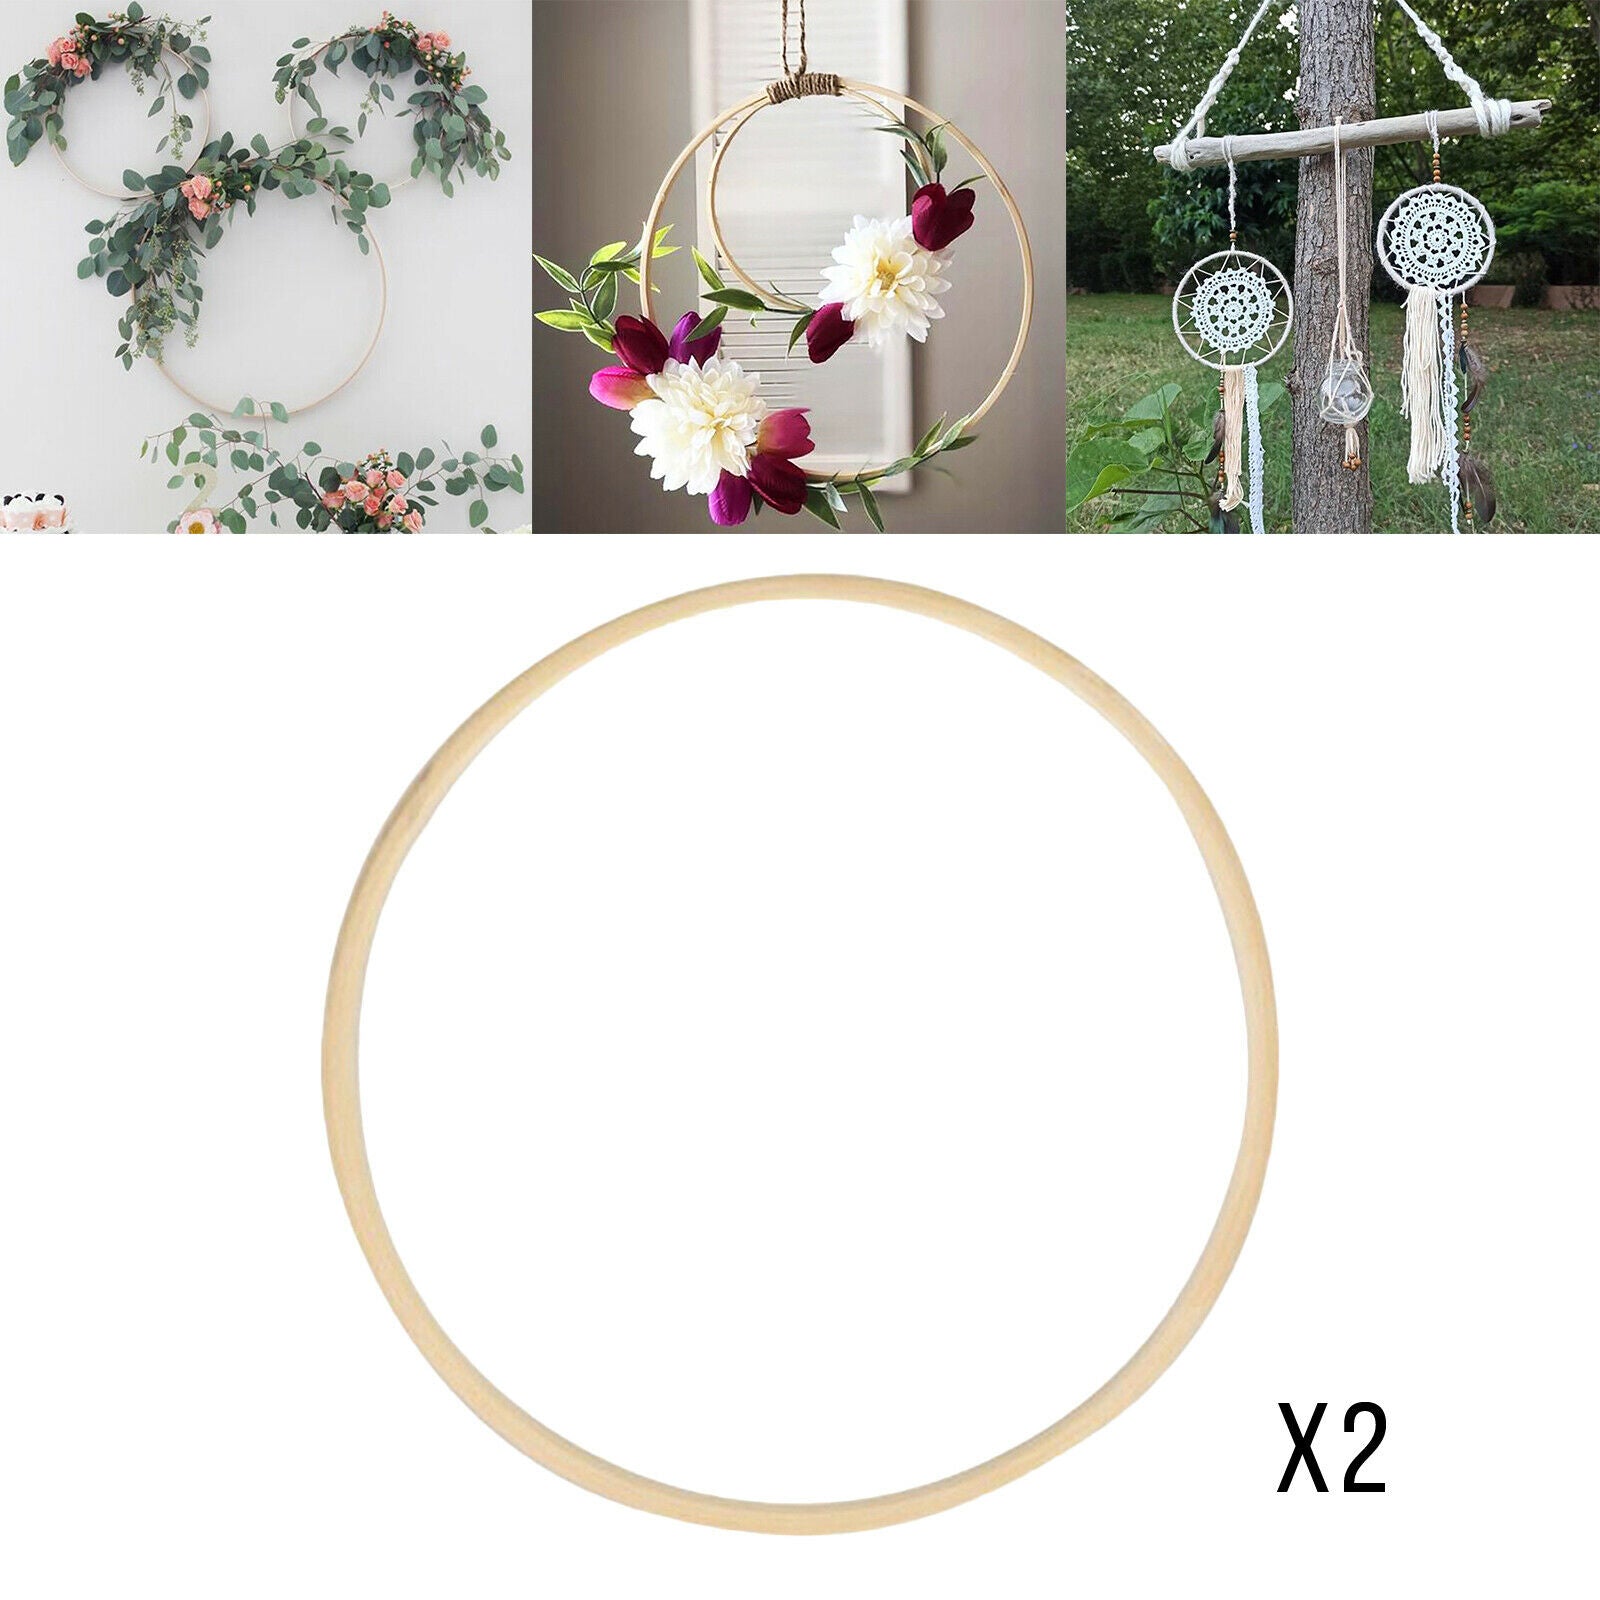 2x Embroidery Hoops Macrame Ring for DIY Art Craft Dream Catcher Wedding Home